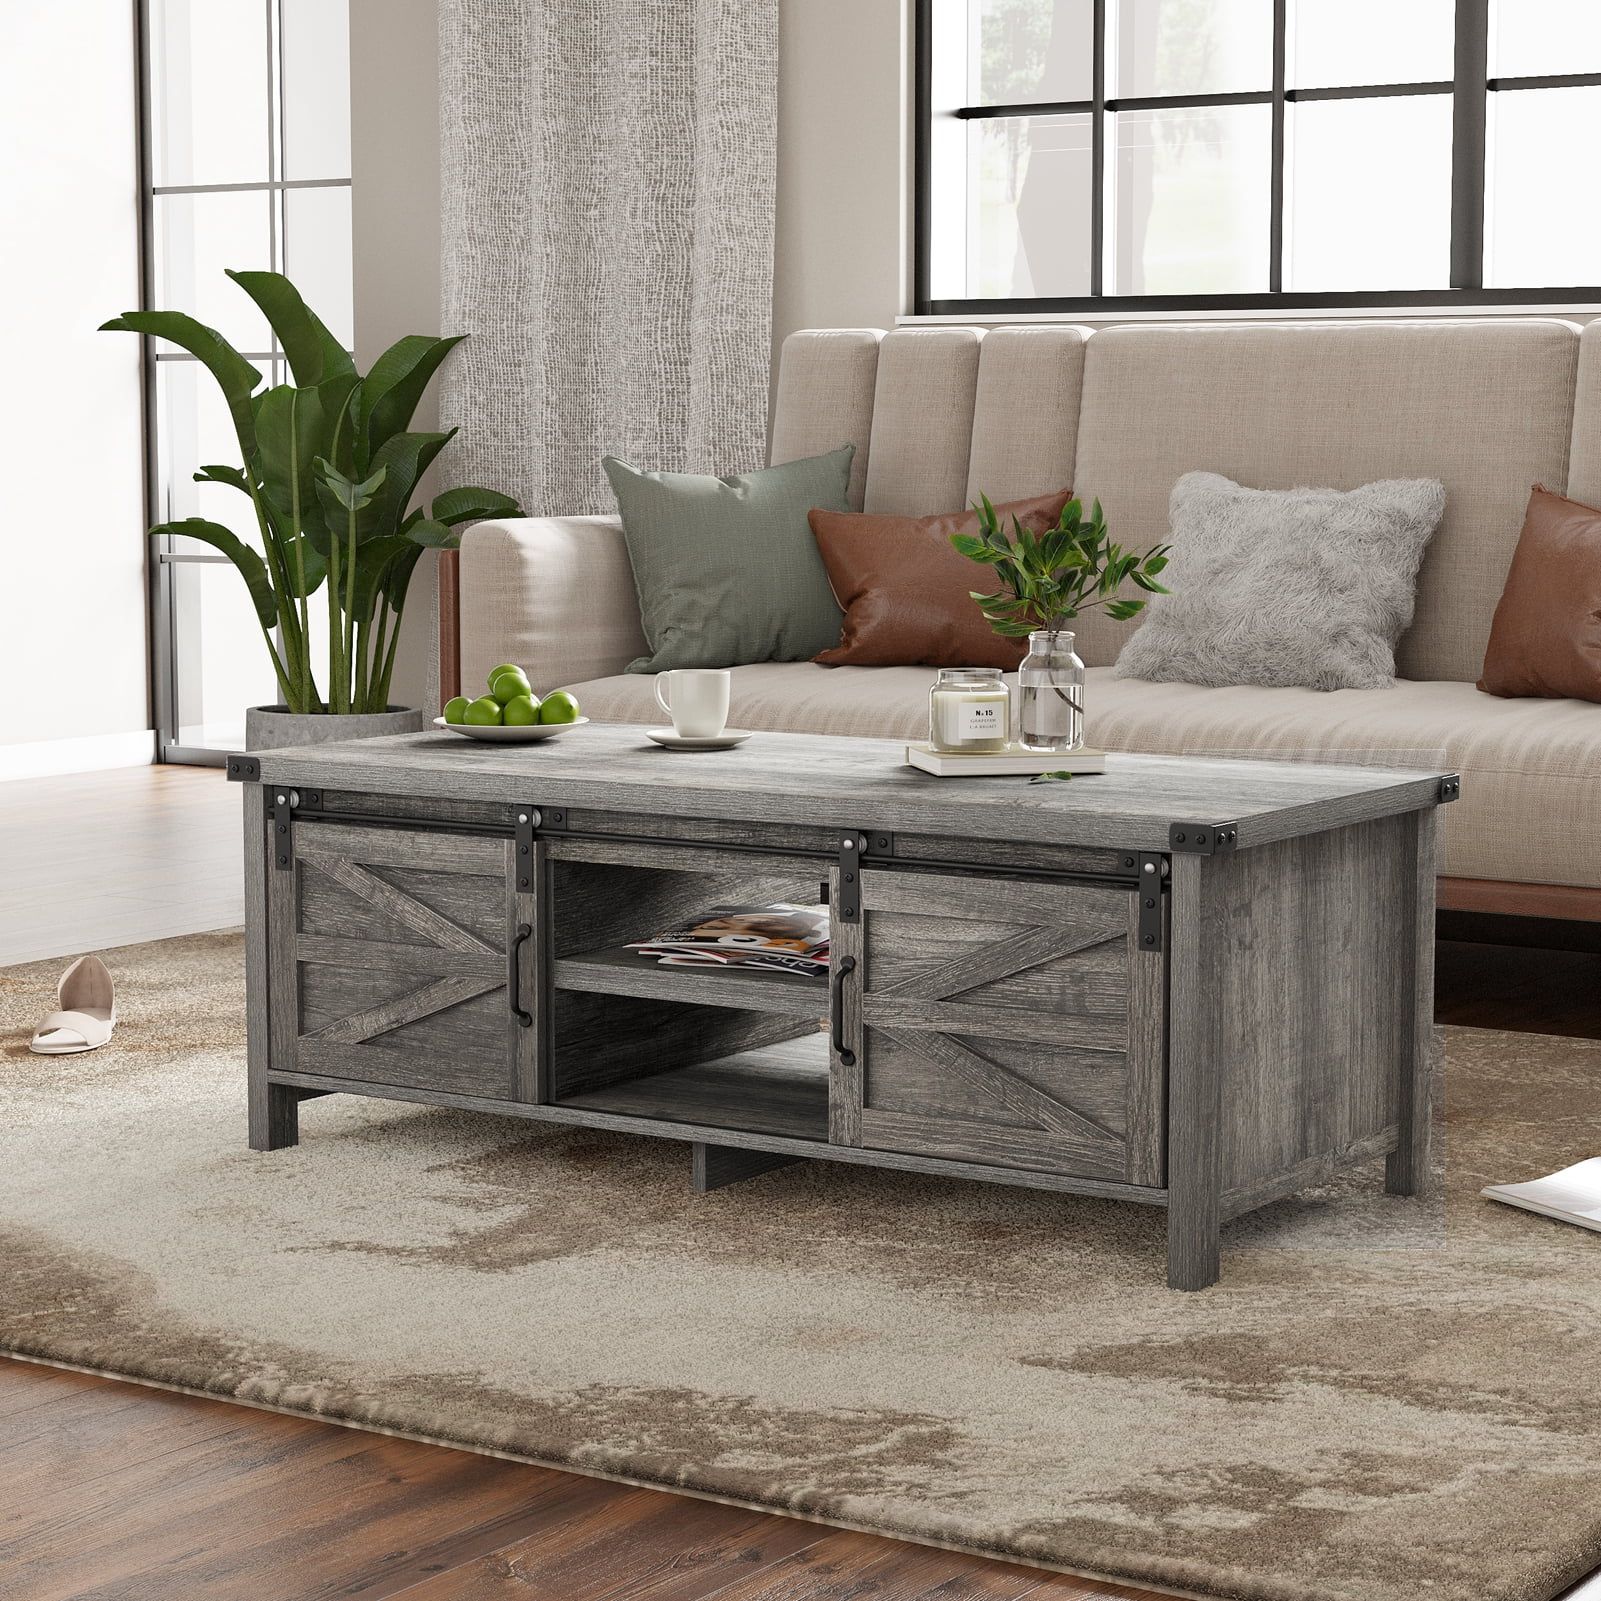 Yaoping 48" Modern Farmhouse Coffee Table With Adjustable Storage Cabinets  Shelves, Modern Coffee Table For Living Room With Sliding Barn Door –  Walmart In Coffee Tables With Sliding Barn Doors (View 7 of 15)